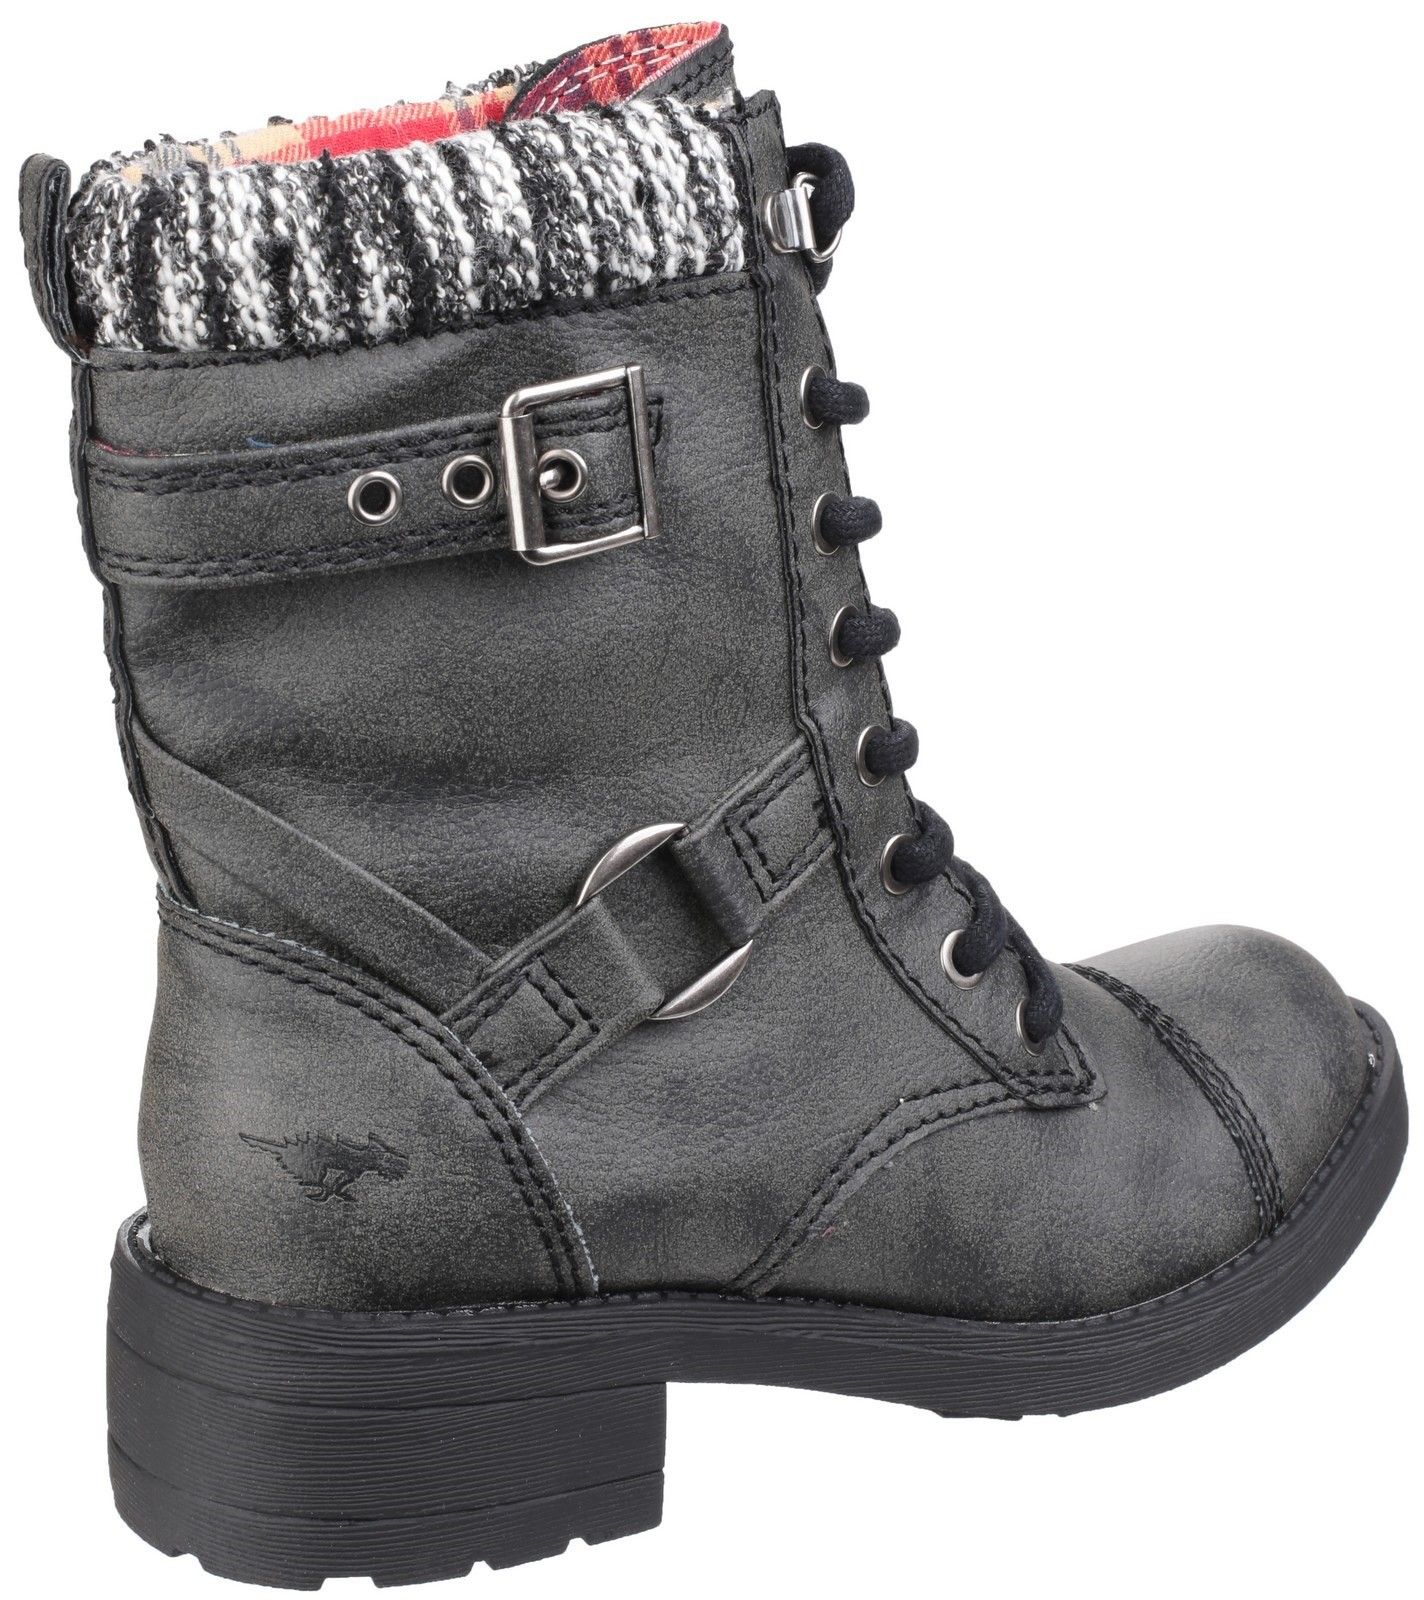 Refresh your boots this Autumn-Winter with the Thunder, a fashionable utility boot that is sure to make you stand out from the crowd. Stylish faux leather upper and soft textile collar combine style and comfort. Finished with buckle straps Stylish PU upper. 
Soft and stylish textile collar. 
Soft textile lining for comfort. 
Durable and flexible rubber sole. 
Lace up fastening for a personalised fit.